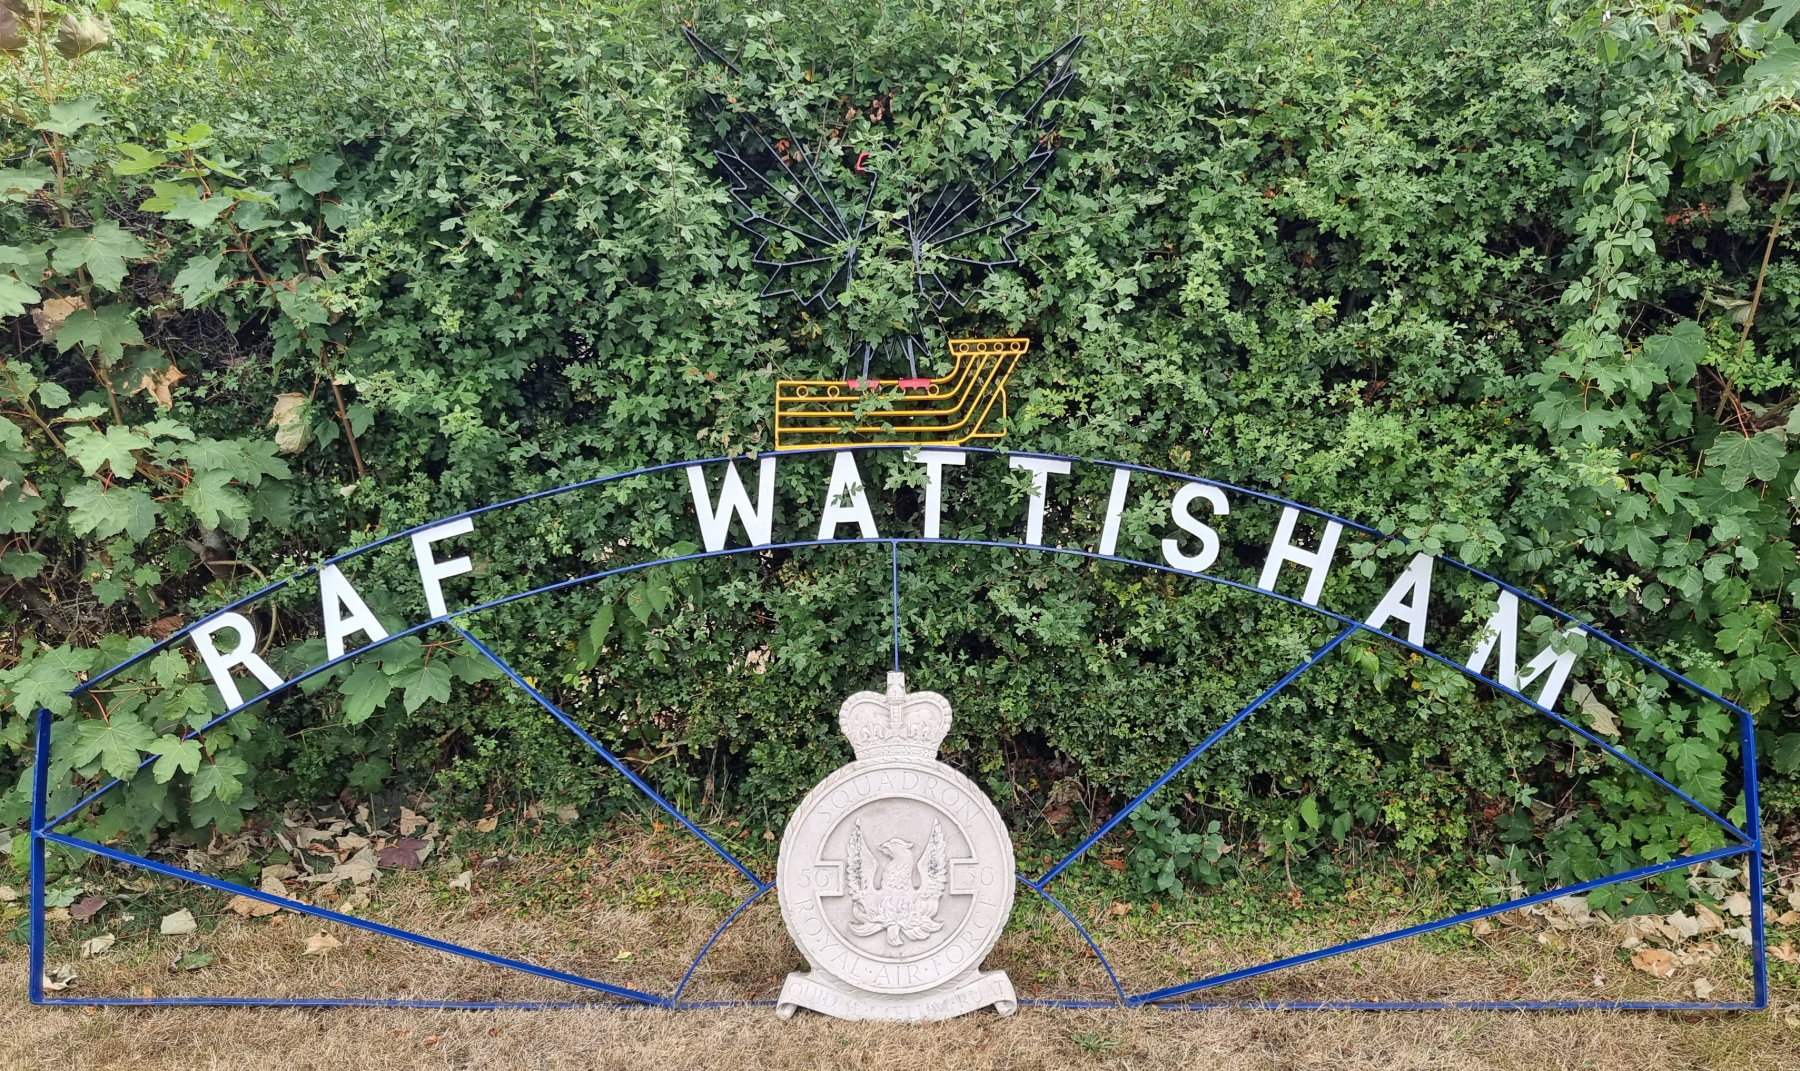 56 Sqn Crest and Main Gate ironwork